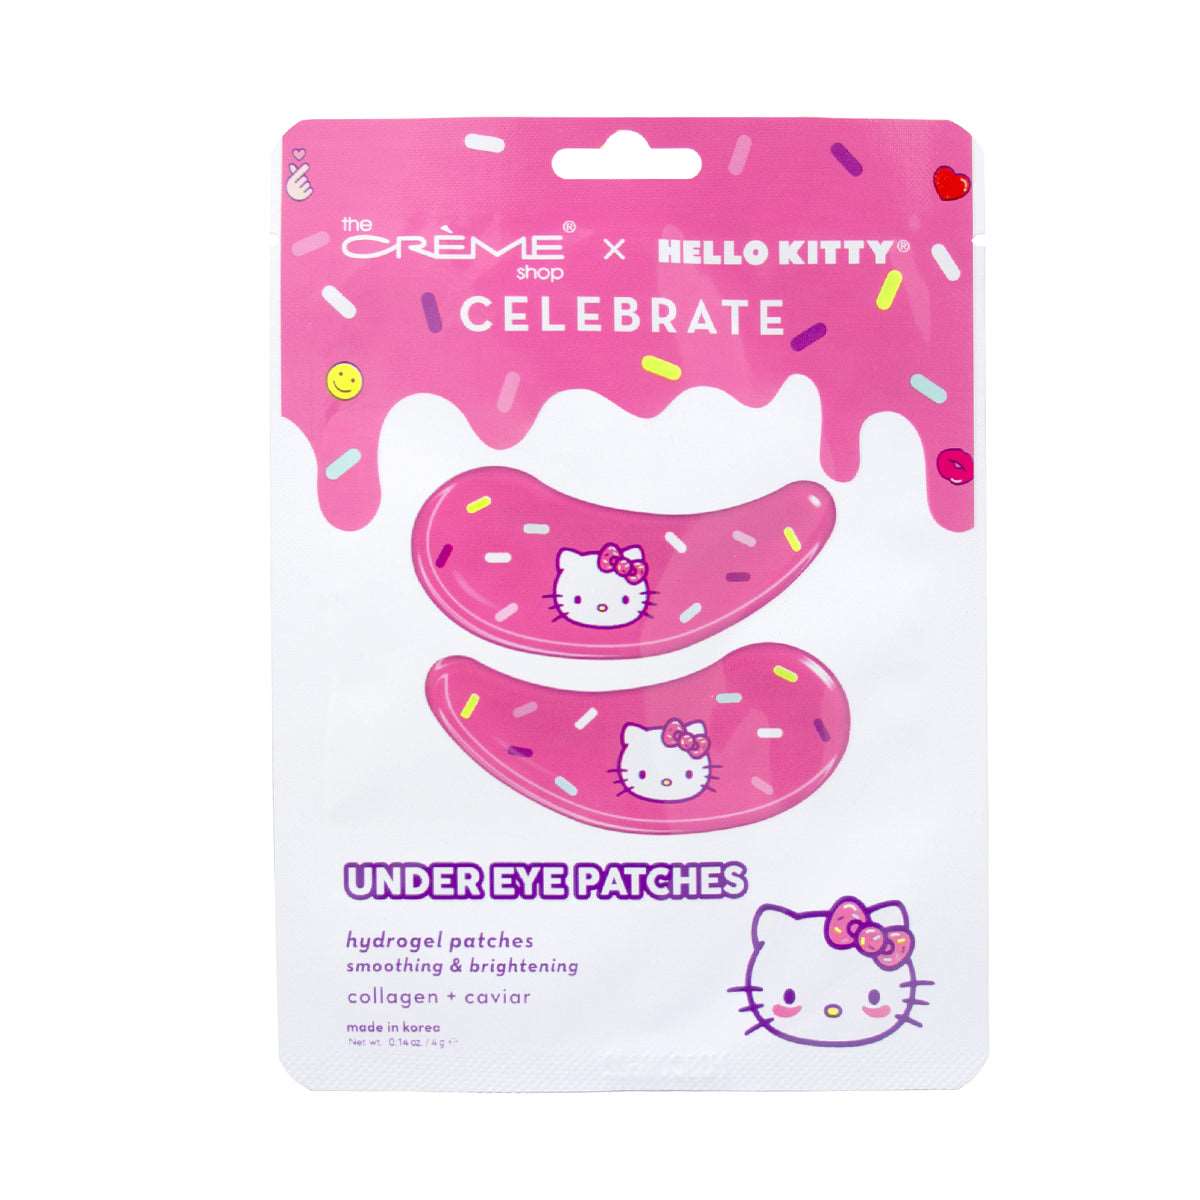 CELEBRATE  UNDER EYE PATCHES - THE CREME SHOP  X HELLO KITTY